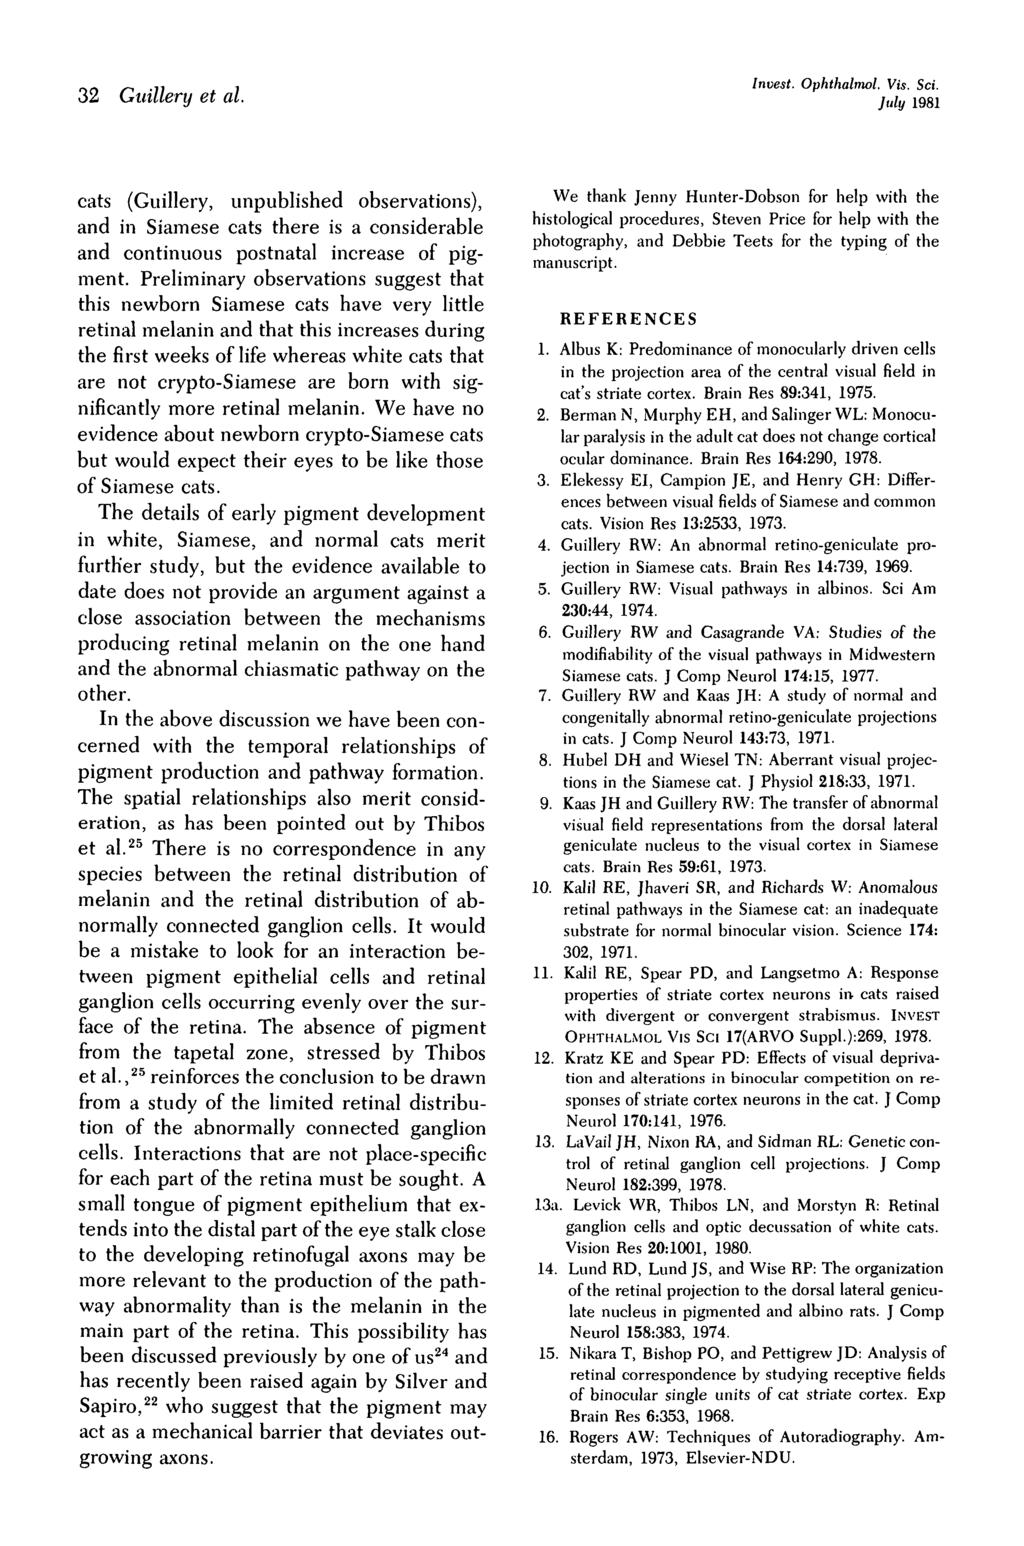 32 Guillery et al. Invest. Ophthalmol. Vis. Sci. July 1981 cats (Guillery, unpublished observations), and in Siamese cats there is a considerable and continuous postnatal increase of pigment.